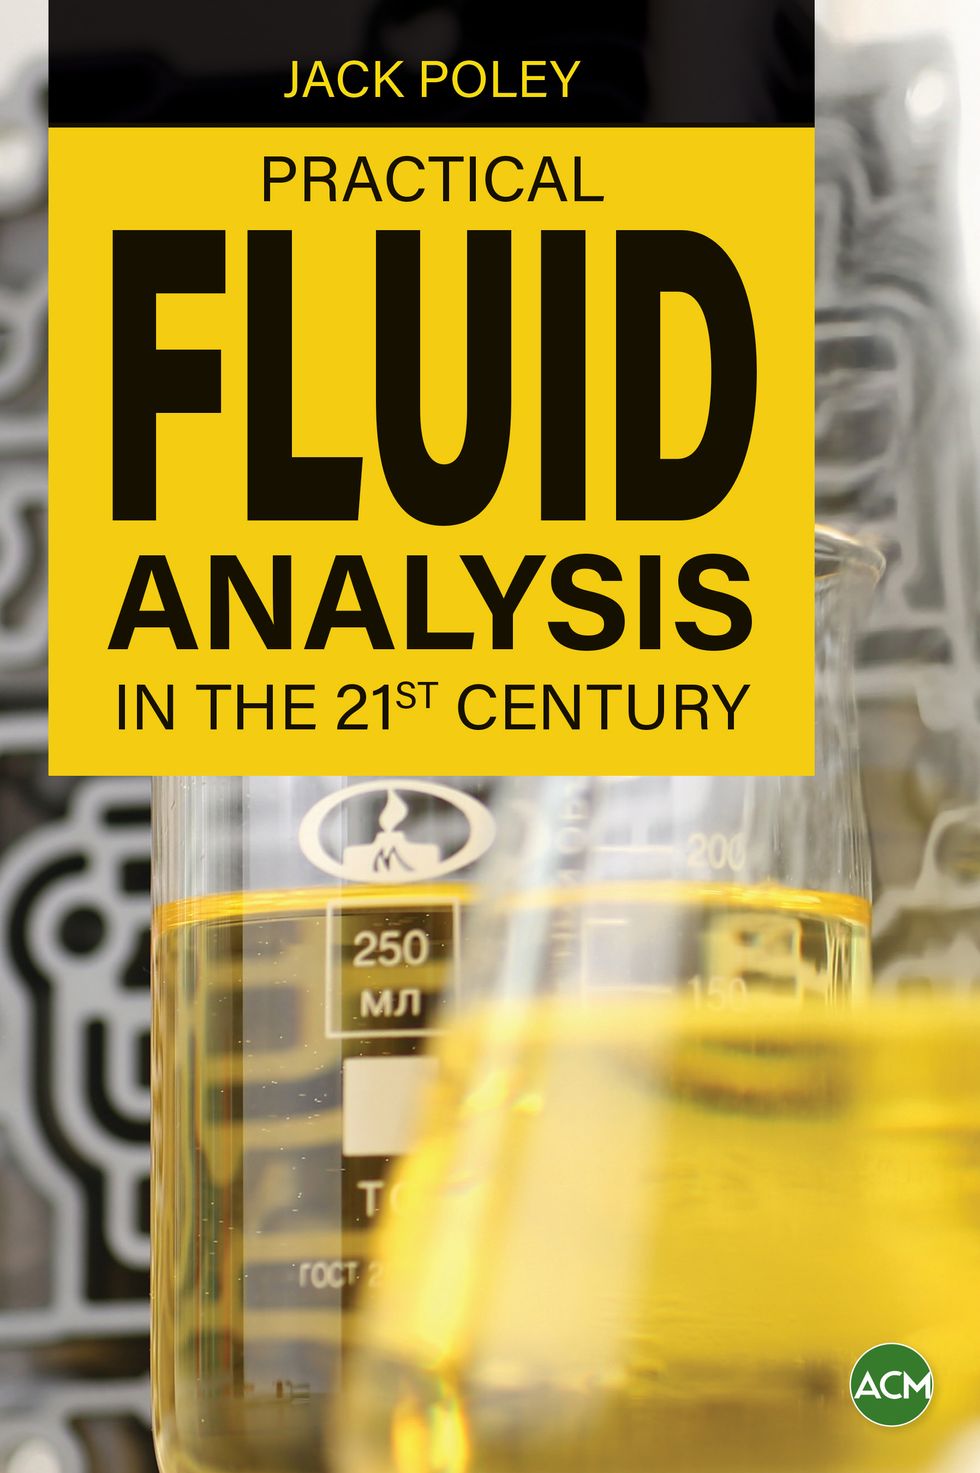  Practical Fluid Analysis in the 21st Century  